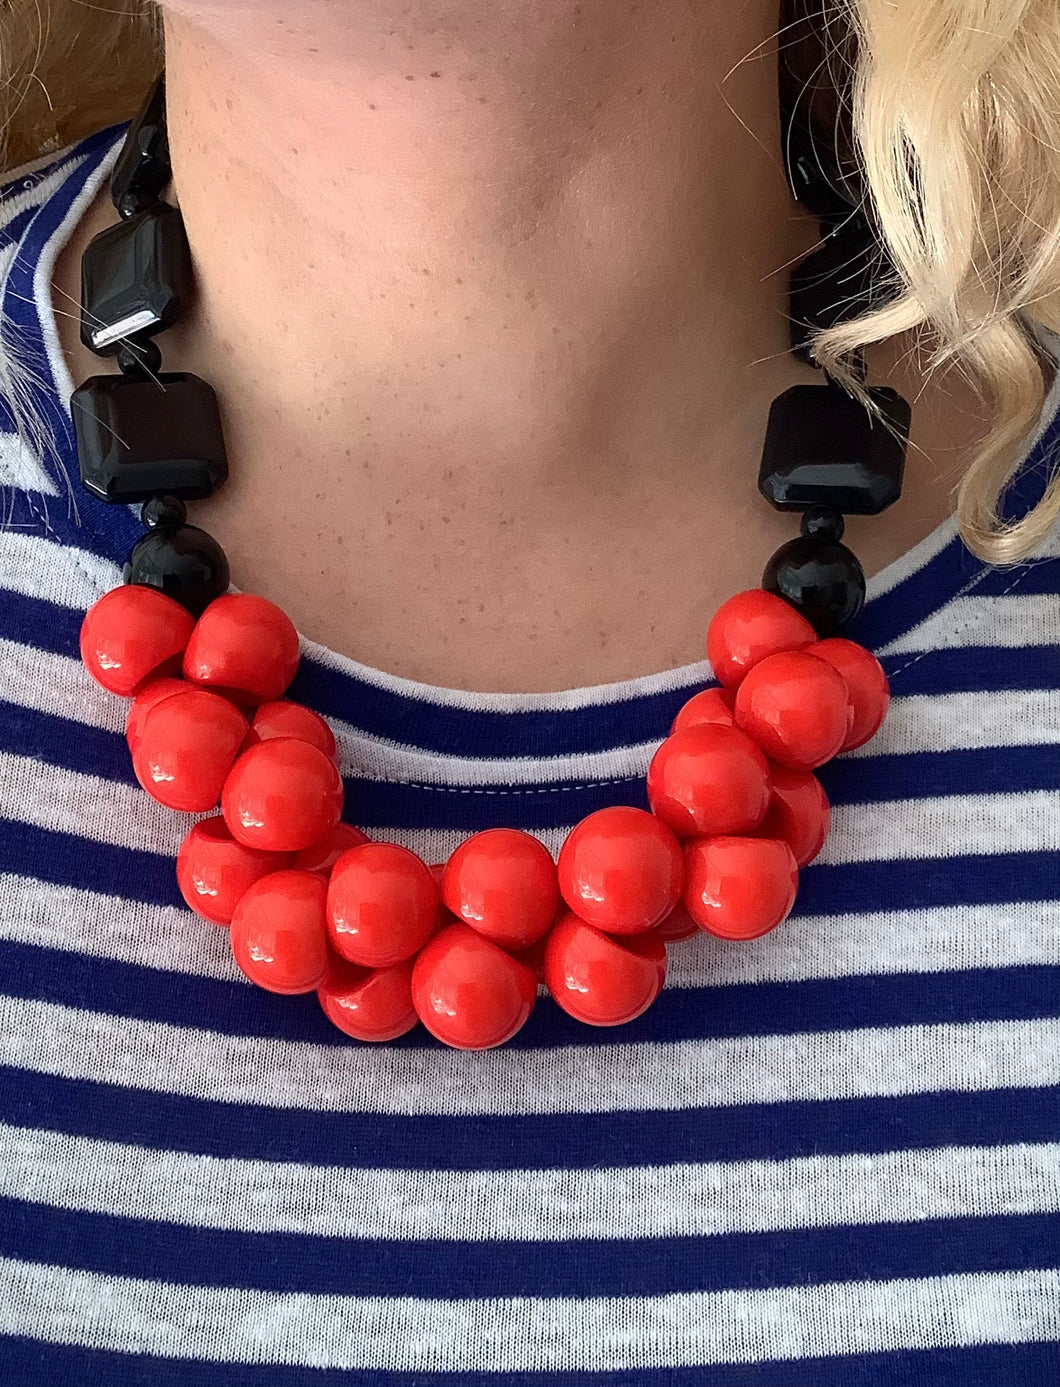 Red Bead Statement Necklace